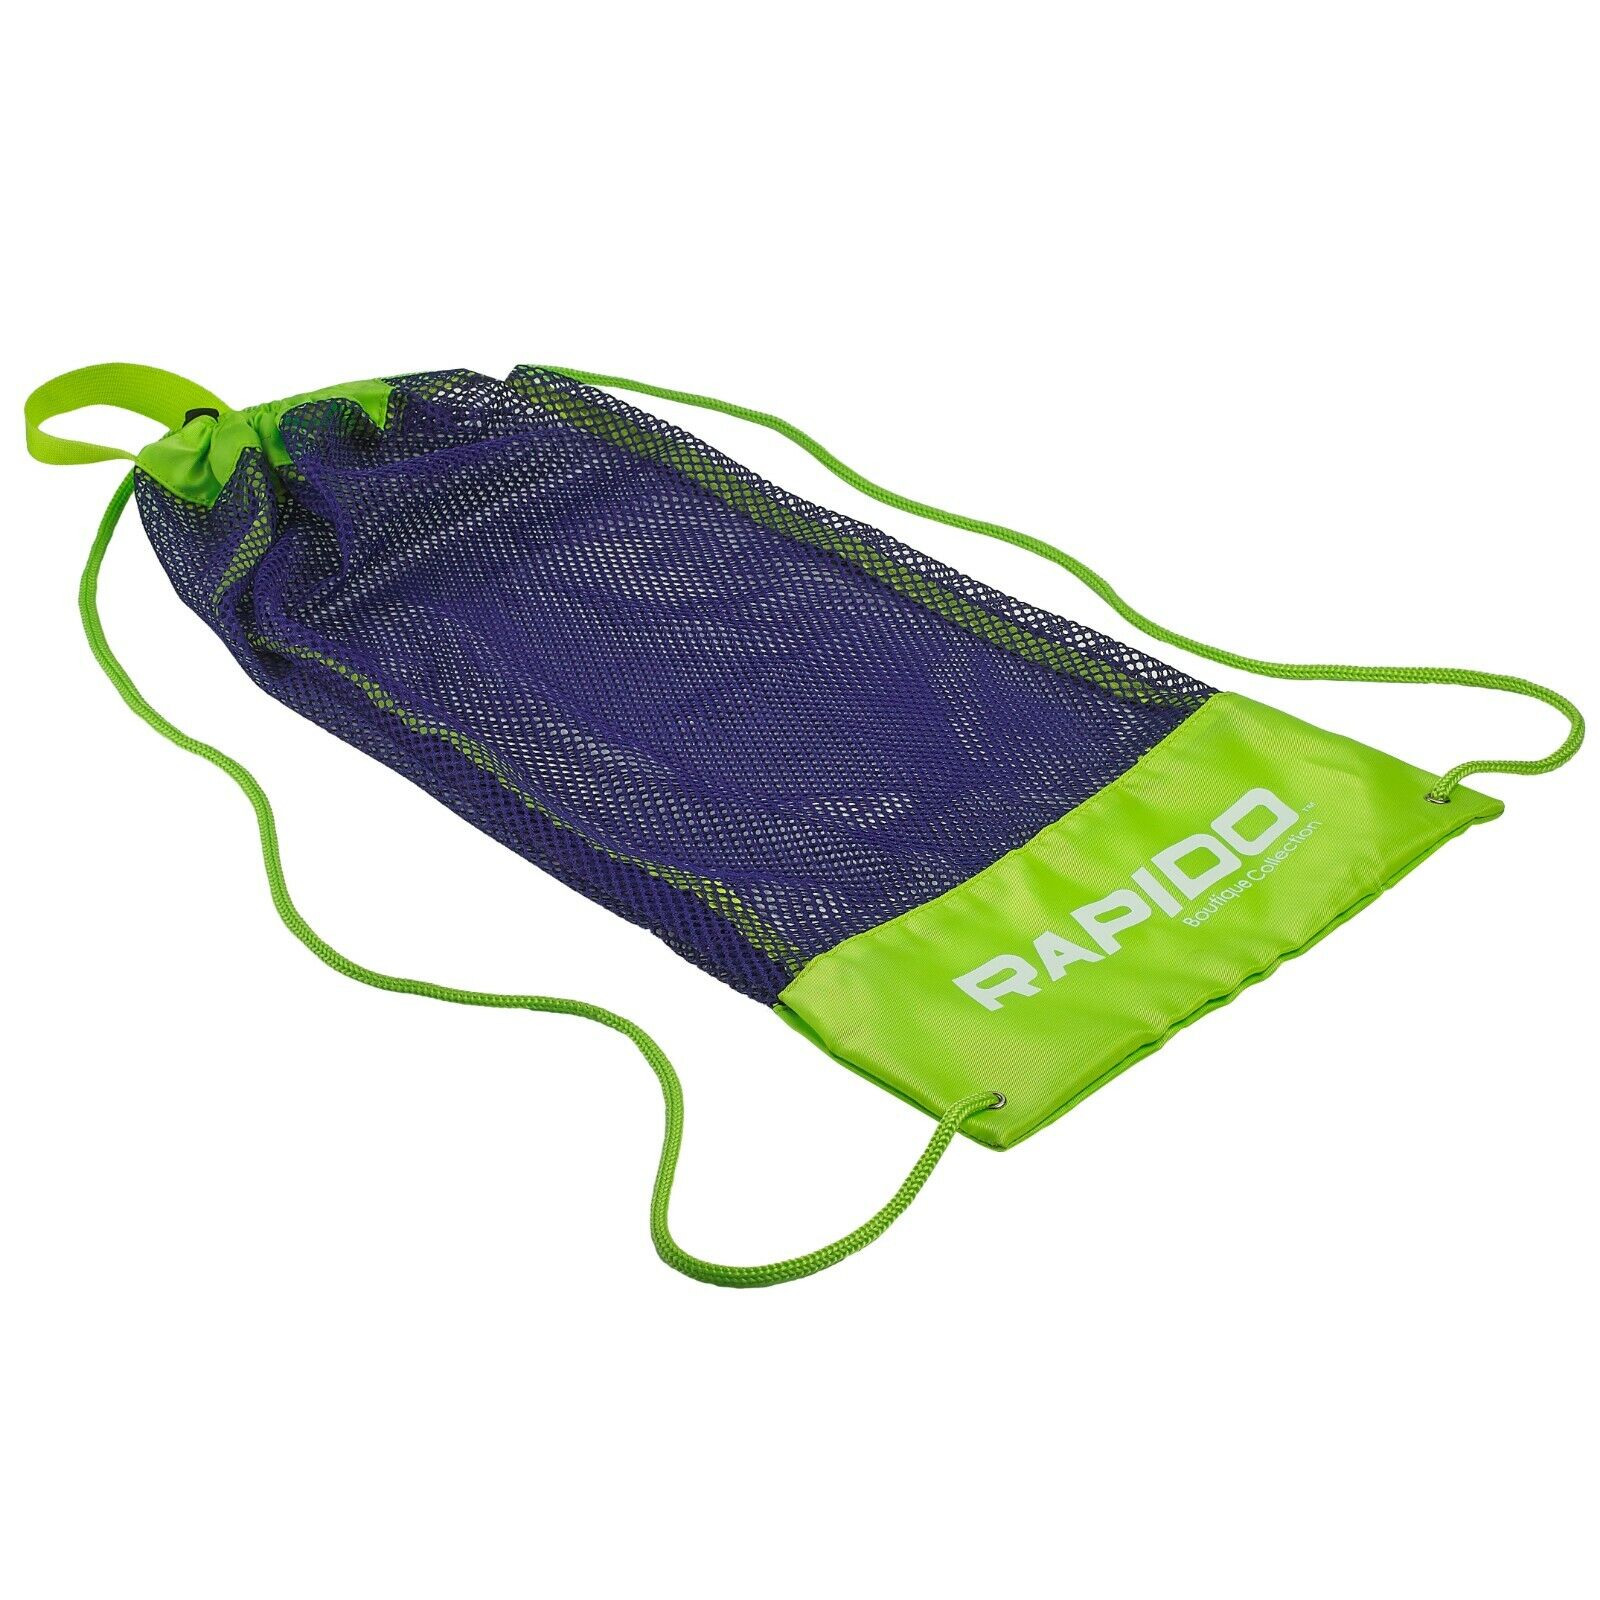 Rapido Boutique Collection In Limited time sale a popularity Mask Fin Snorkel for Bag Sn Scuba Net